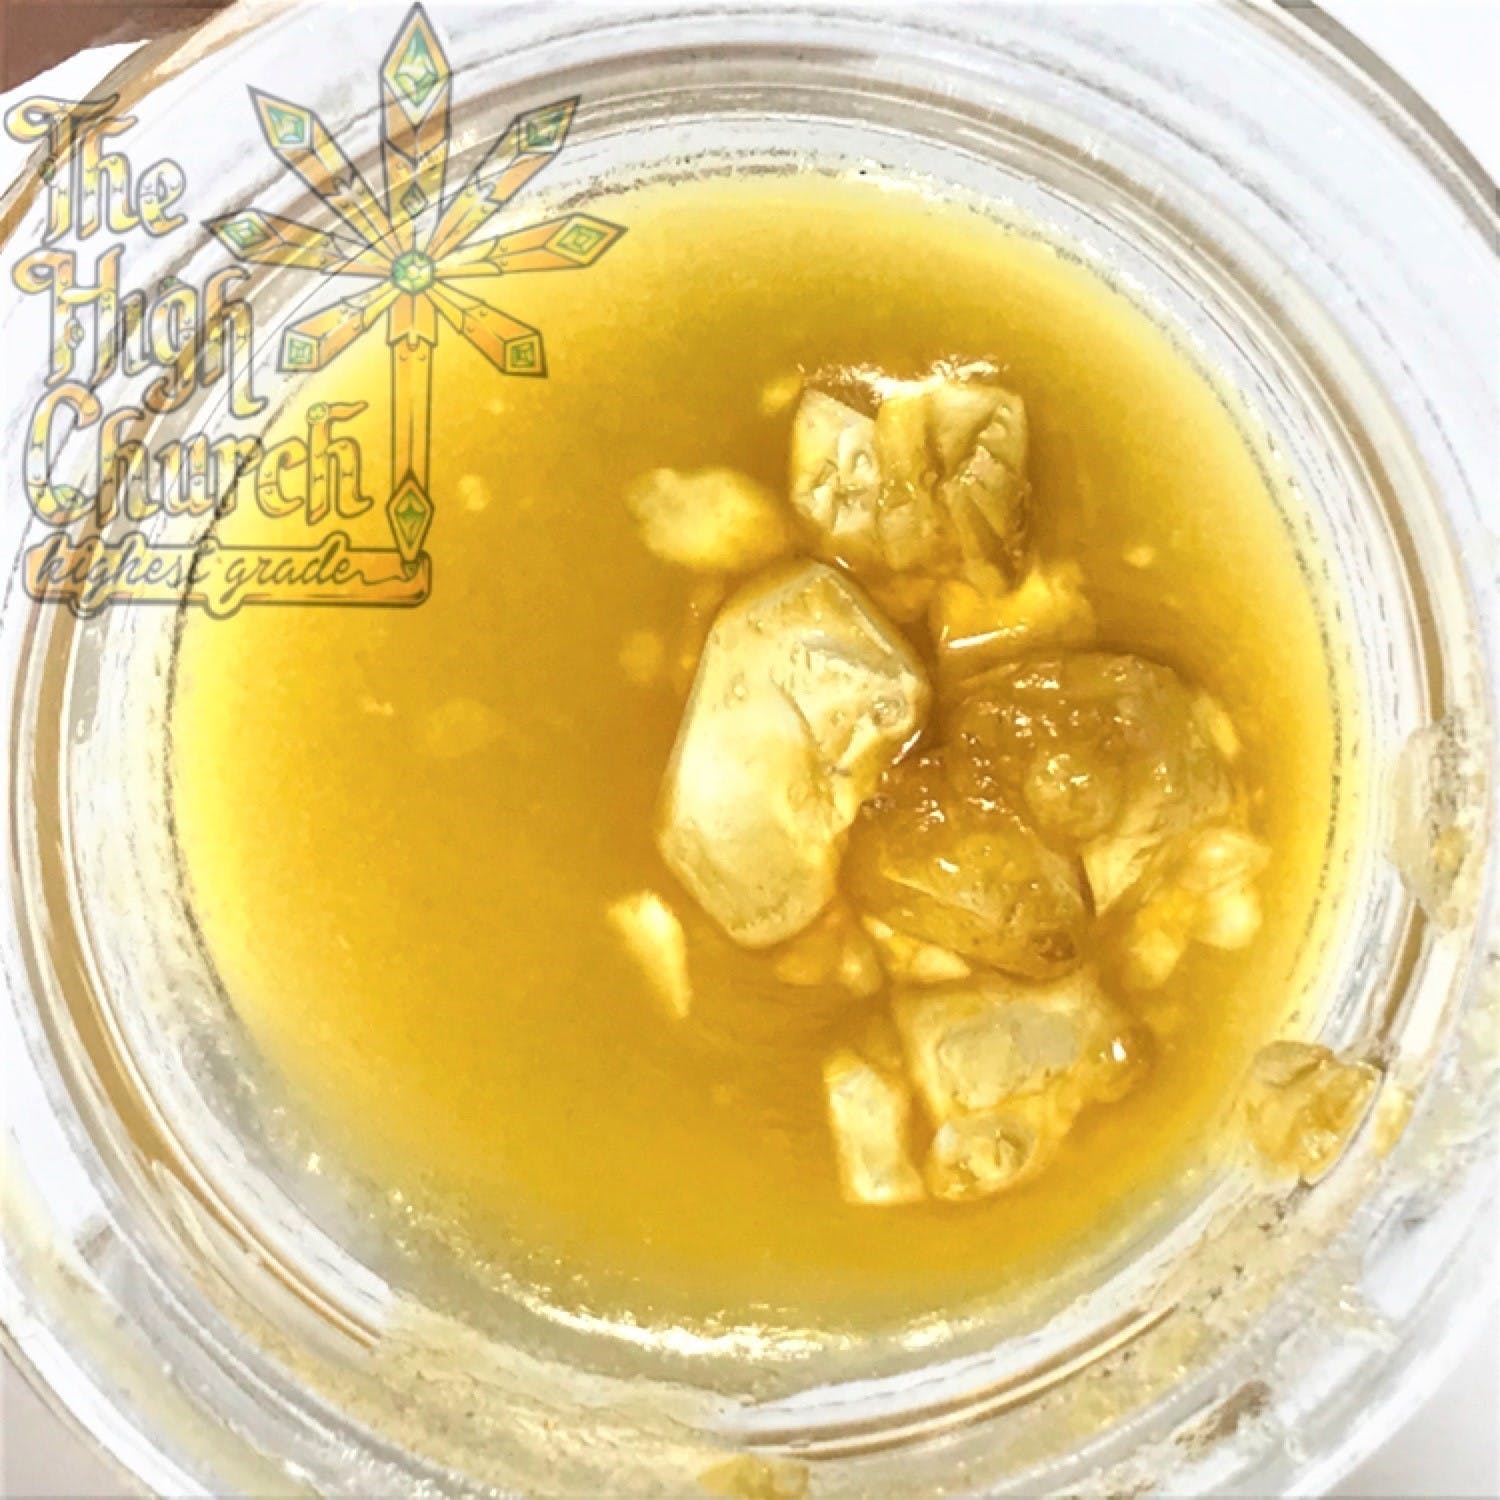 concentrate-shaman-extracts-strawana-live-resin-sauce